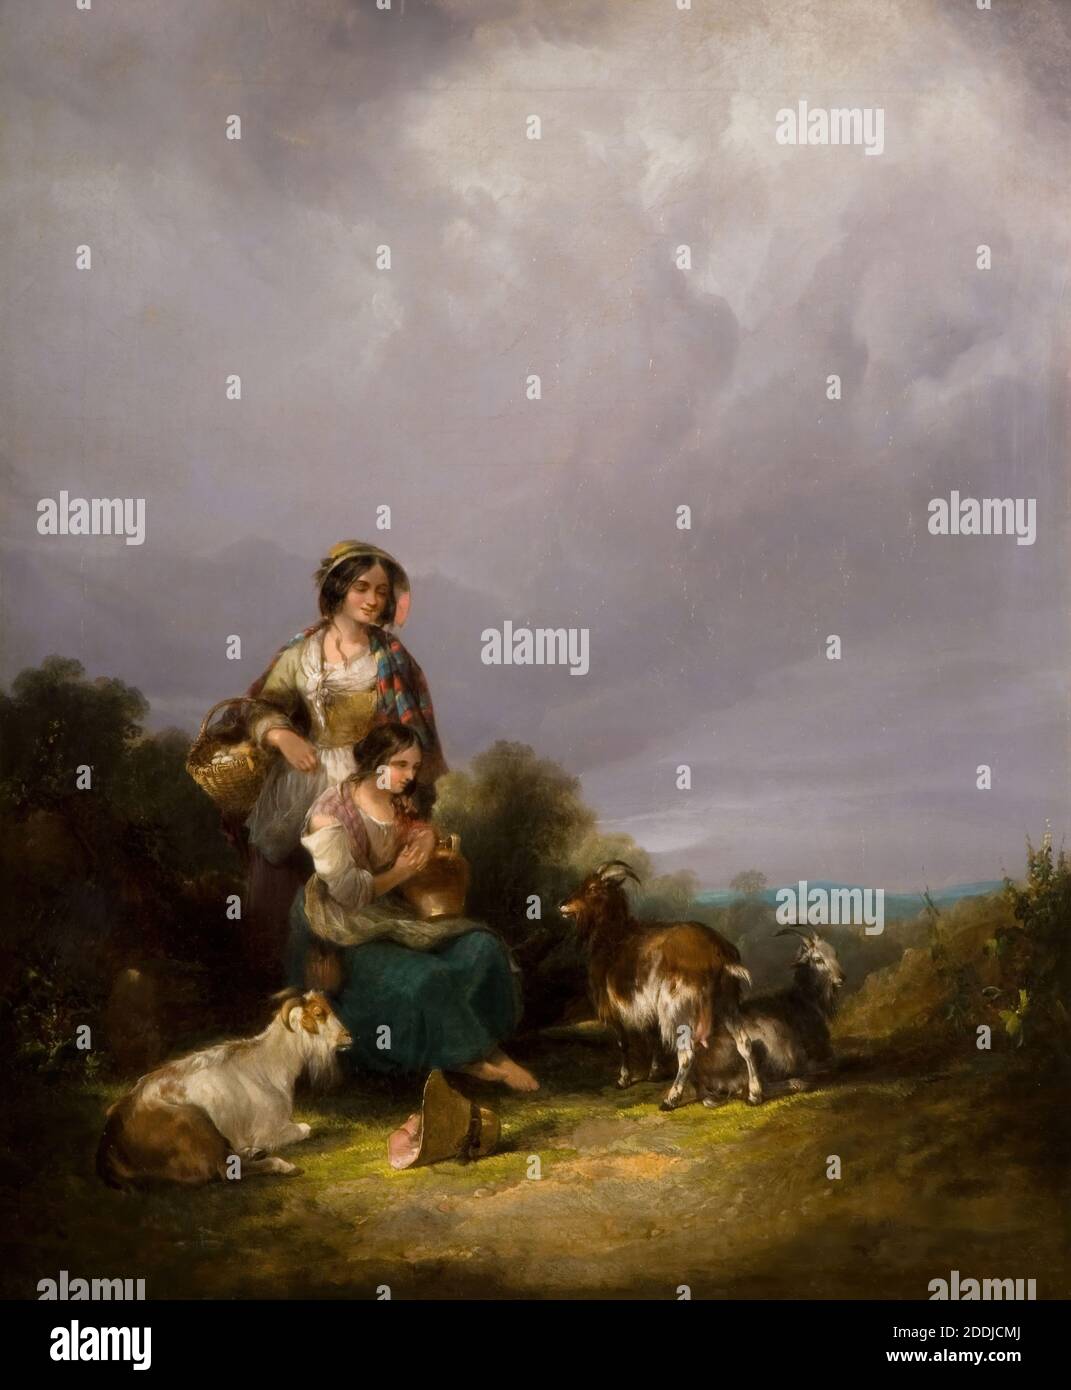 Two Young Women And Goats In A Landscape, 1870 By William Shayer the Elder, Landscape, Oil Painting, Women, Cloud, Female, Goat Stock Photo